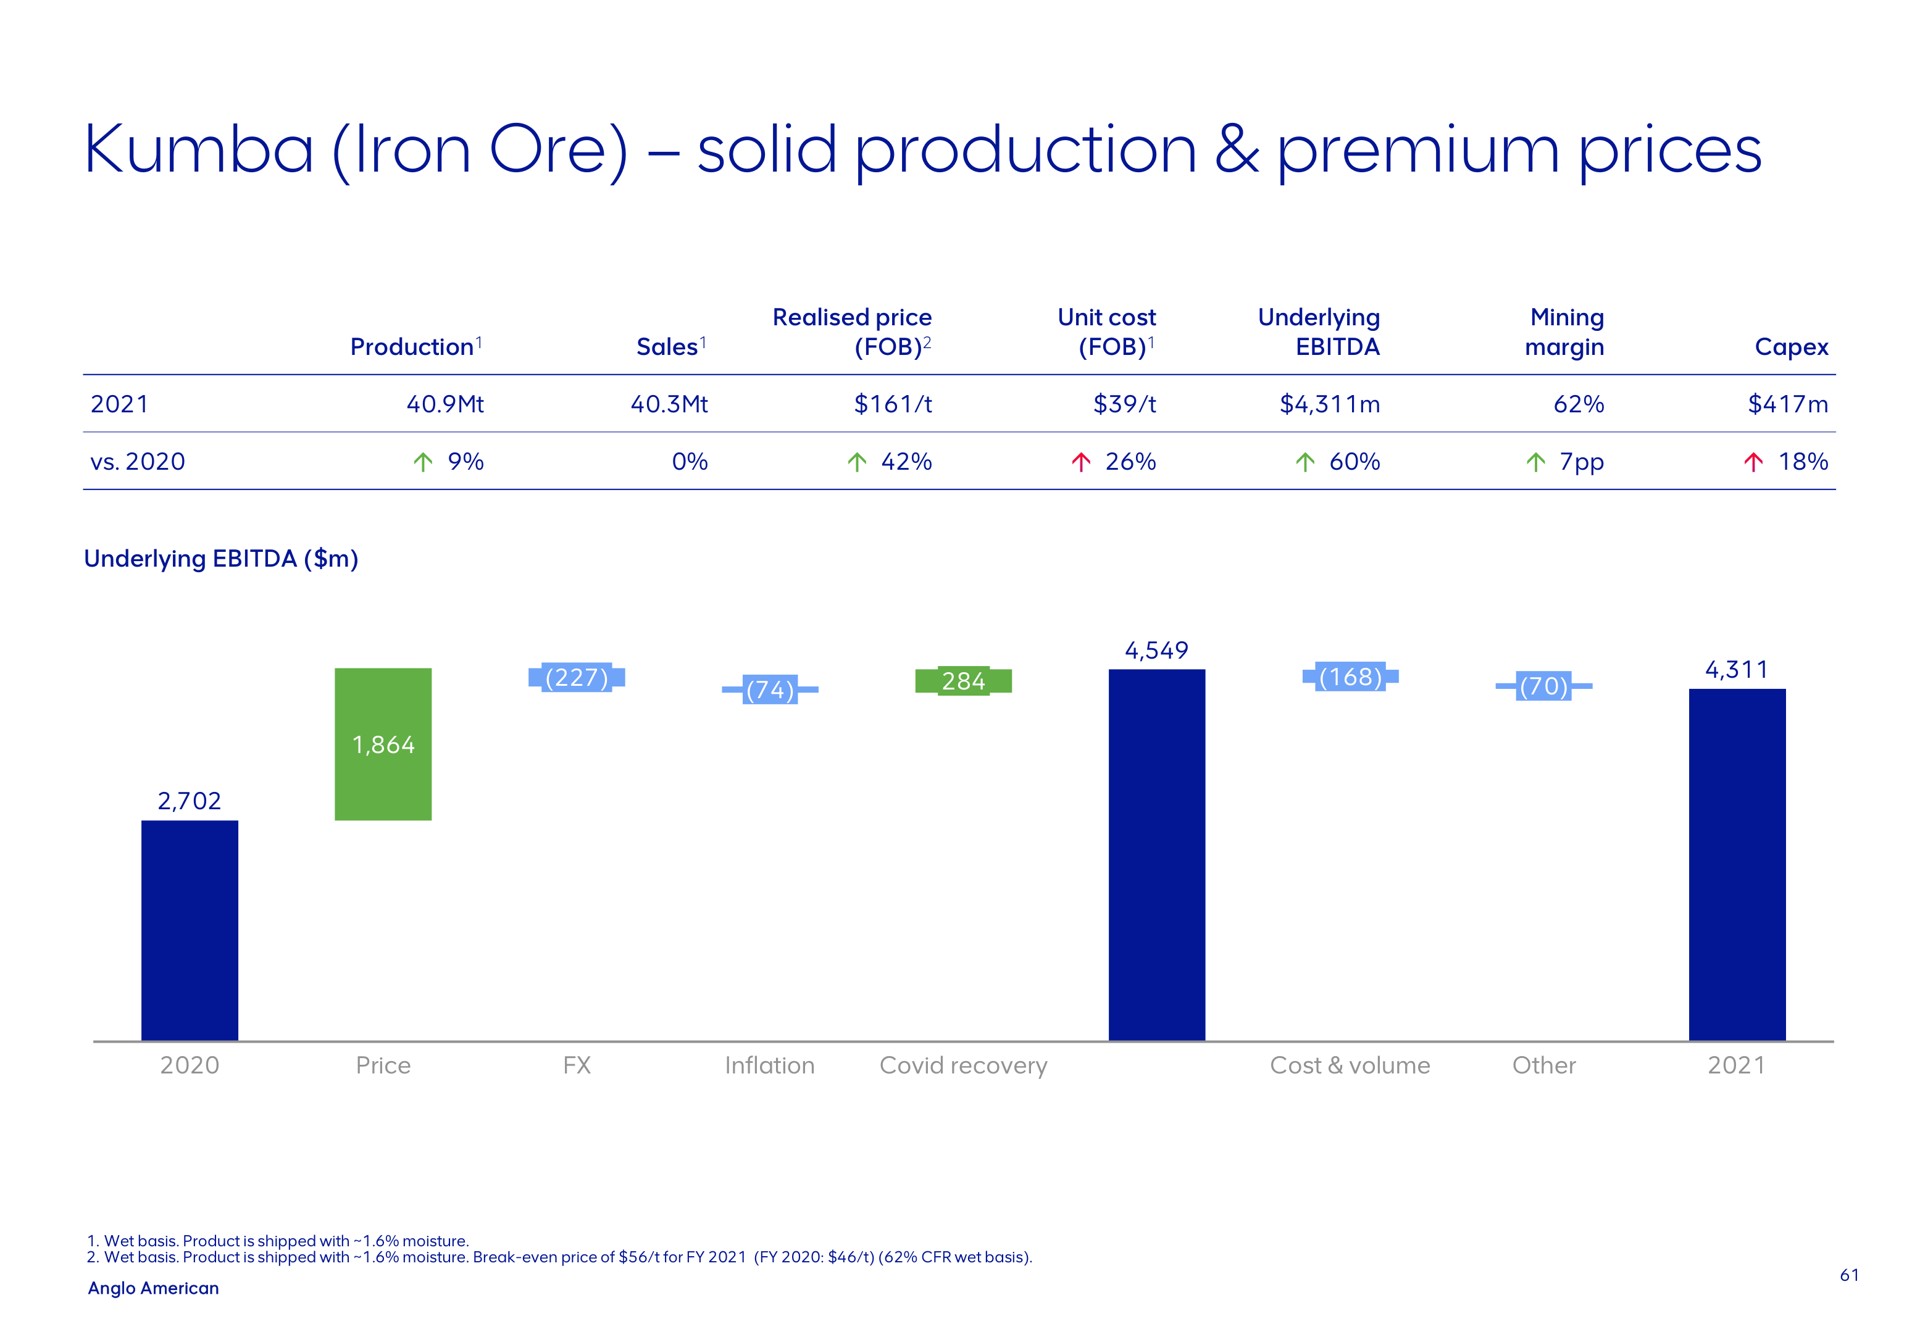 iron ore solid production premium prices | AngloAmerican